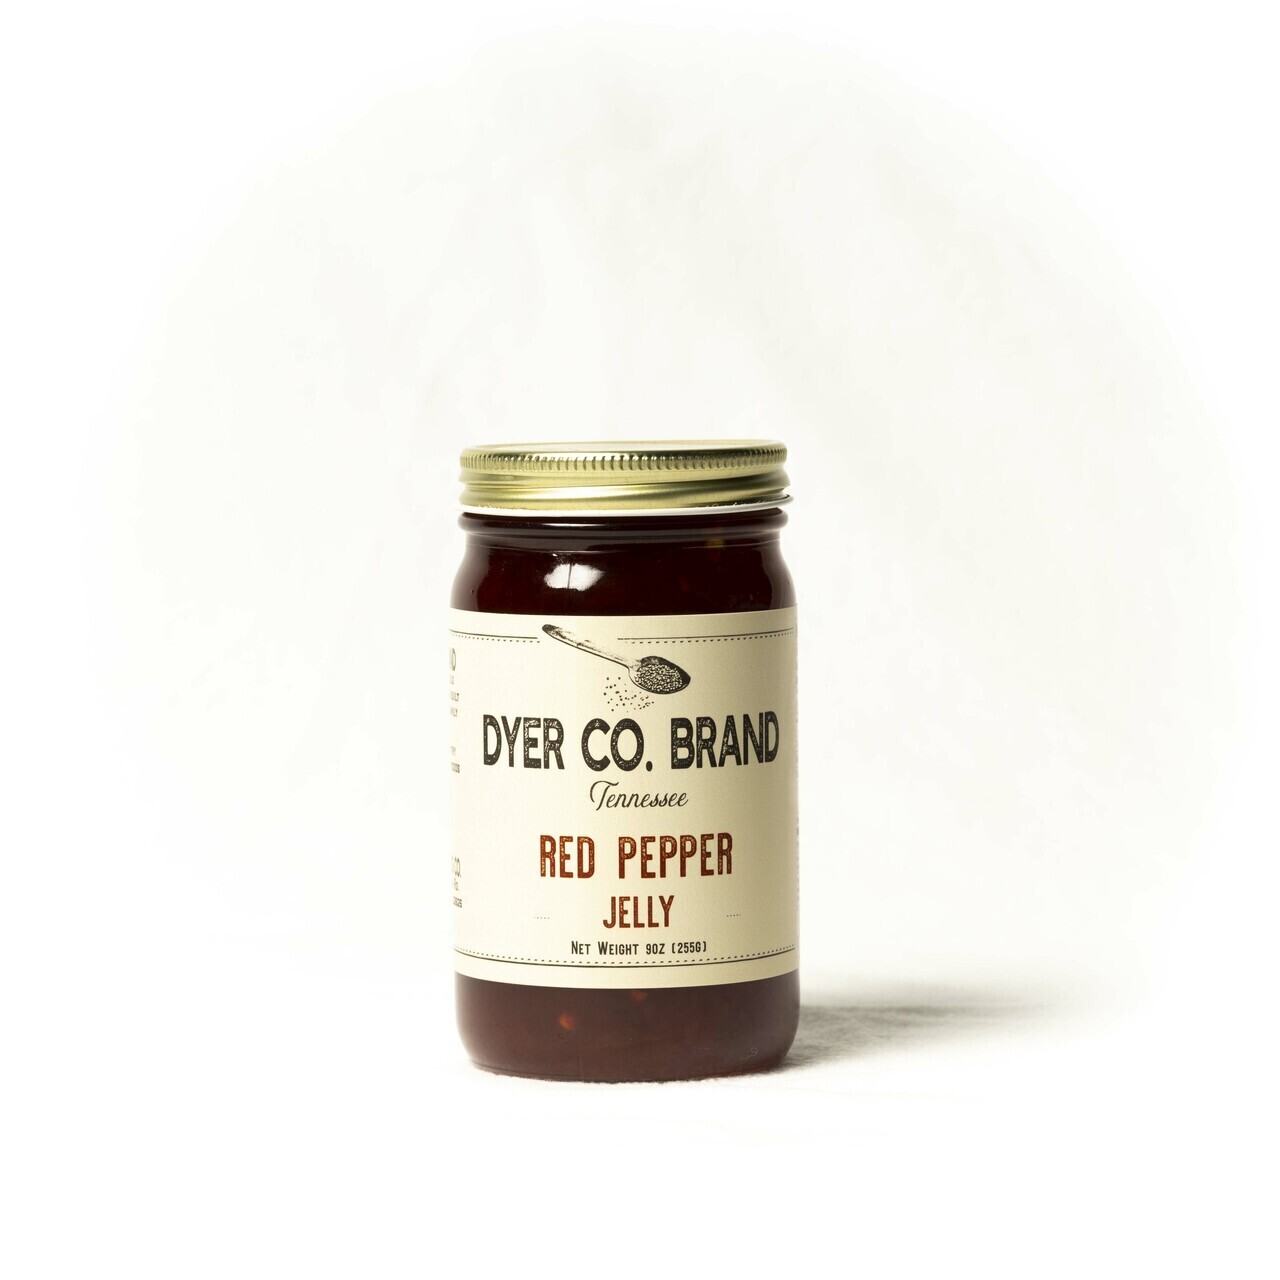 Dyer Co Brand Red Pepper Jelly - 9 oz